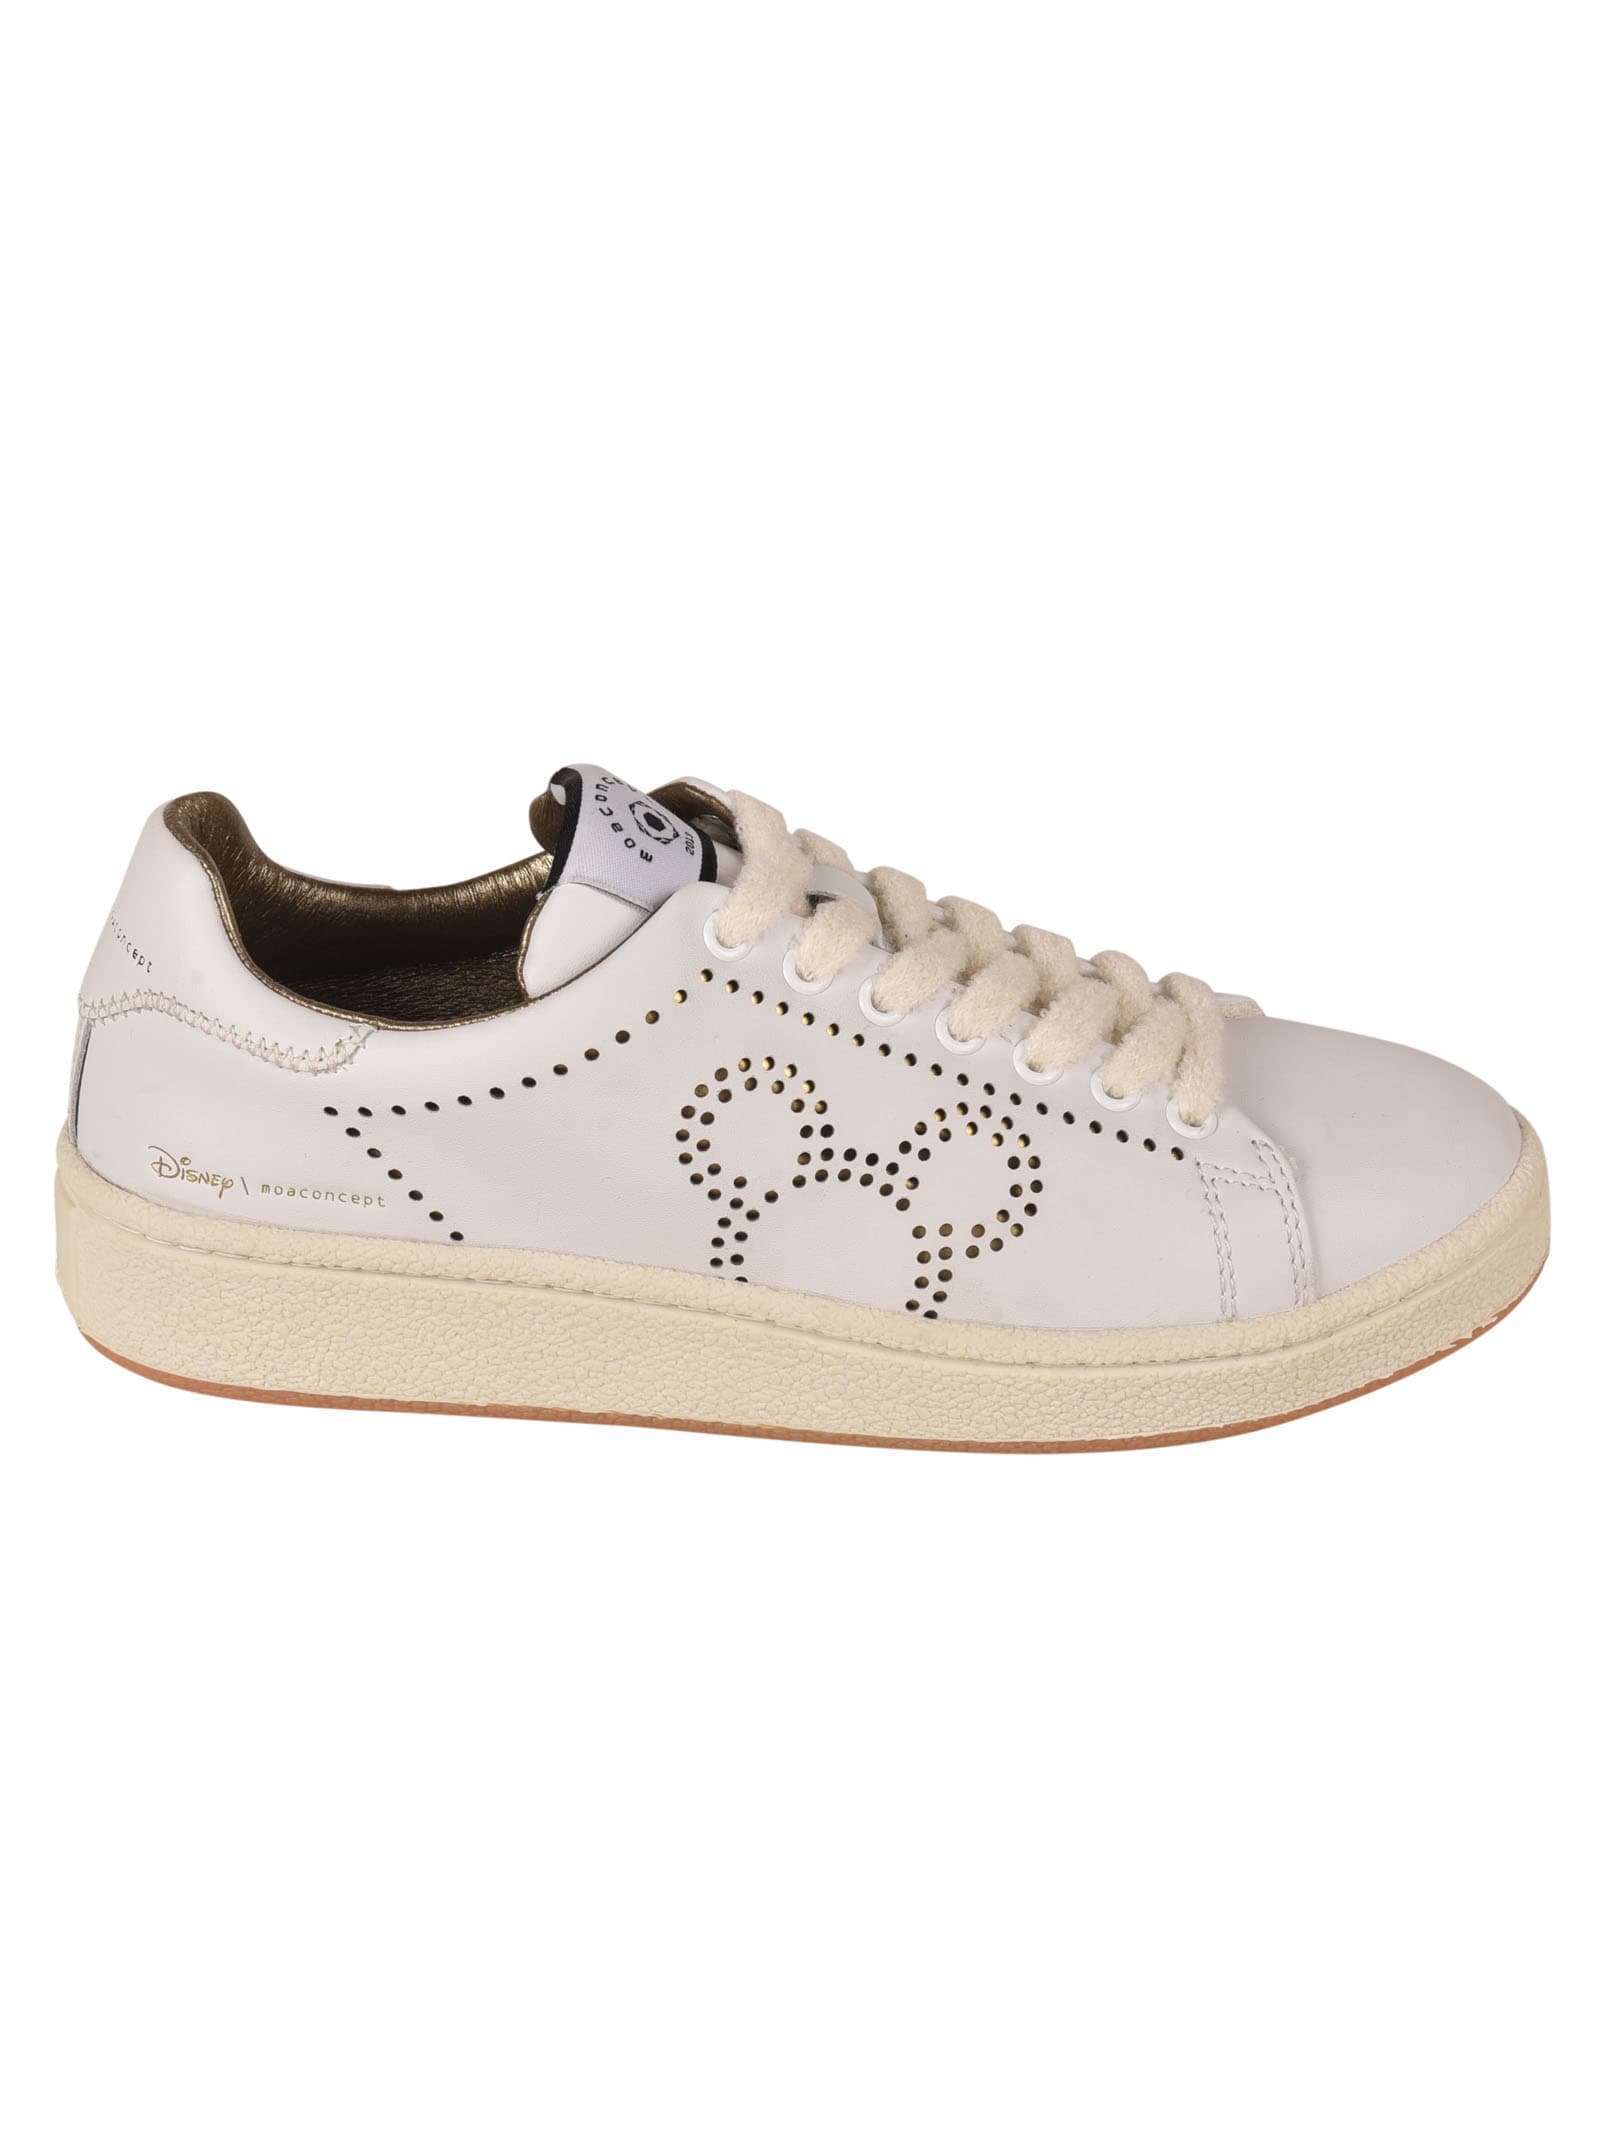 M.O.A. master of arts Mickey Mouse Perforated Sneakers